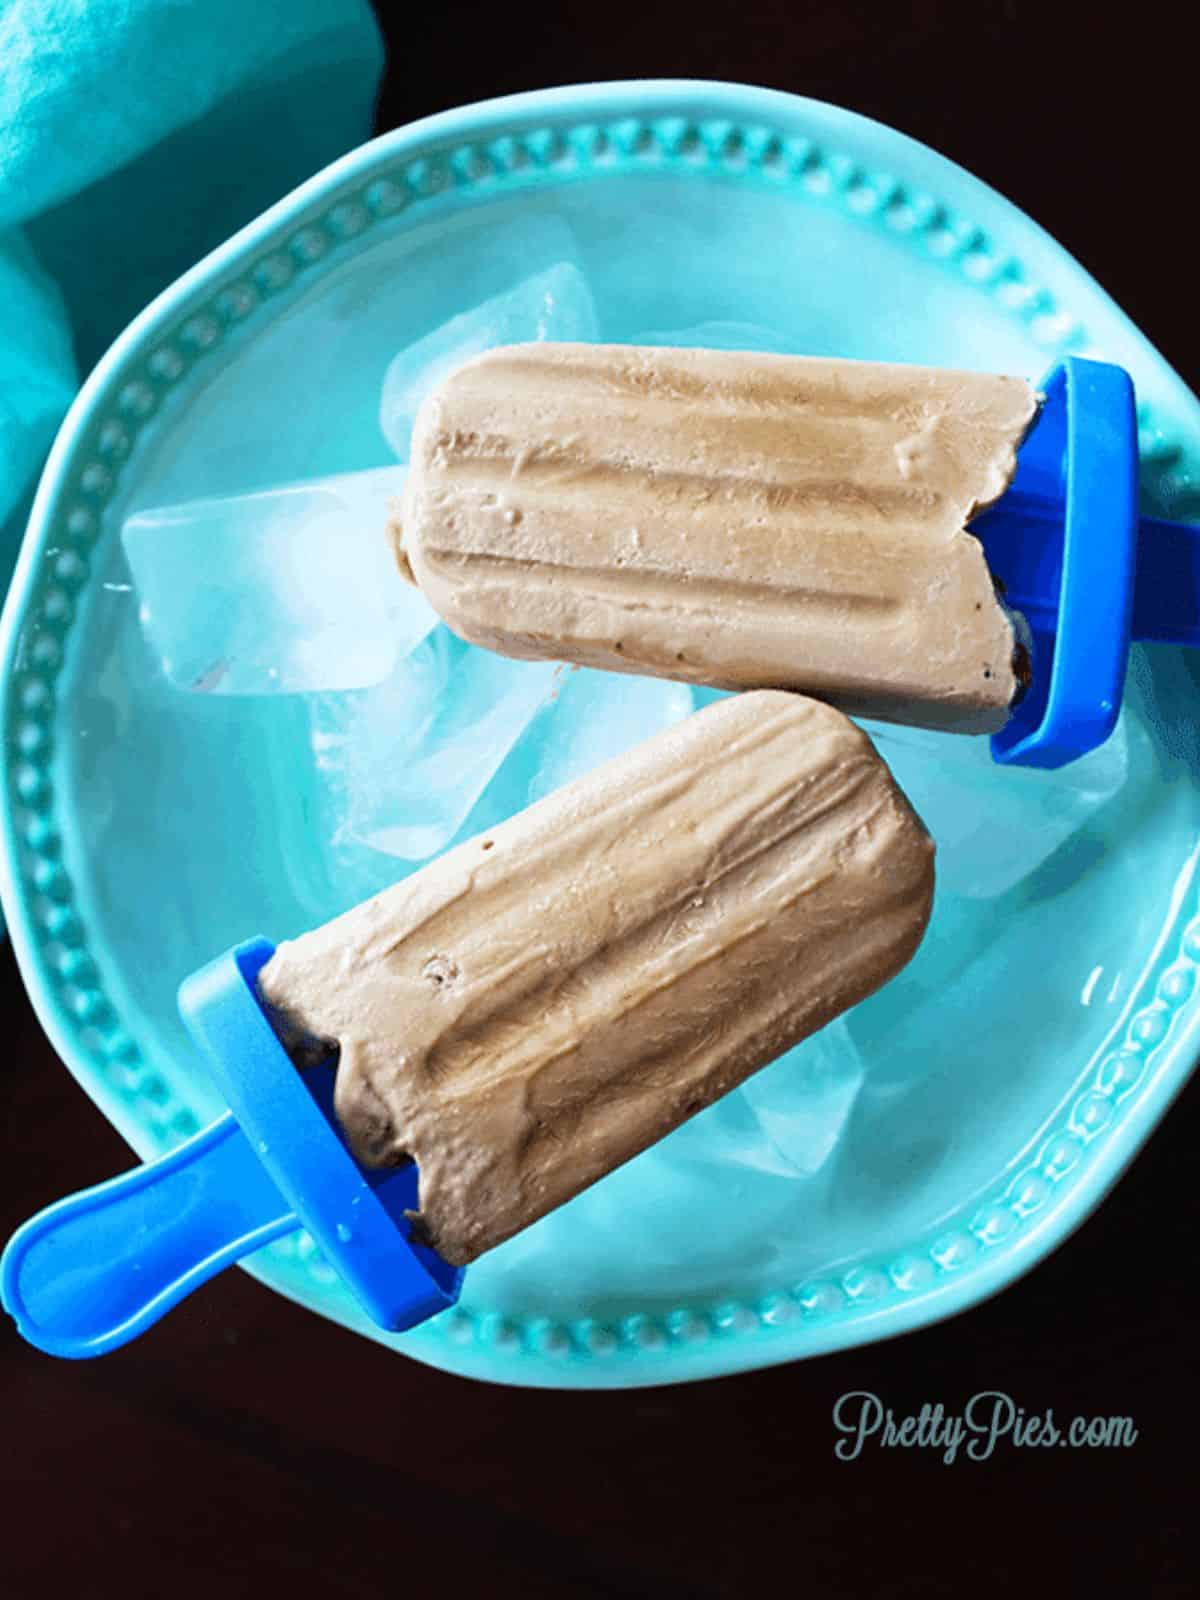 frozen coffee crunch popsicle treats rich with coffee flavor and crunchy almonds.